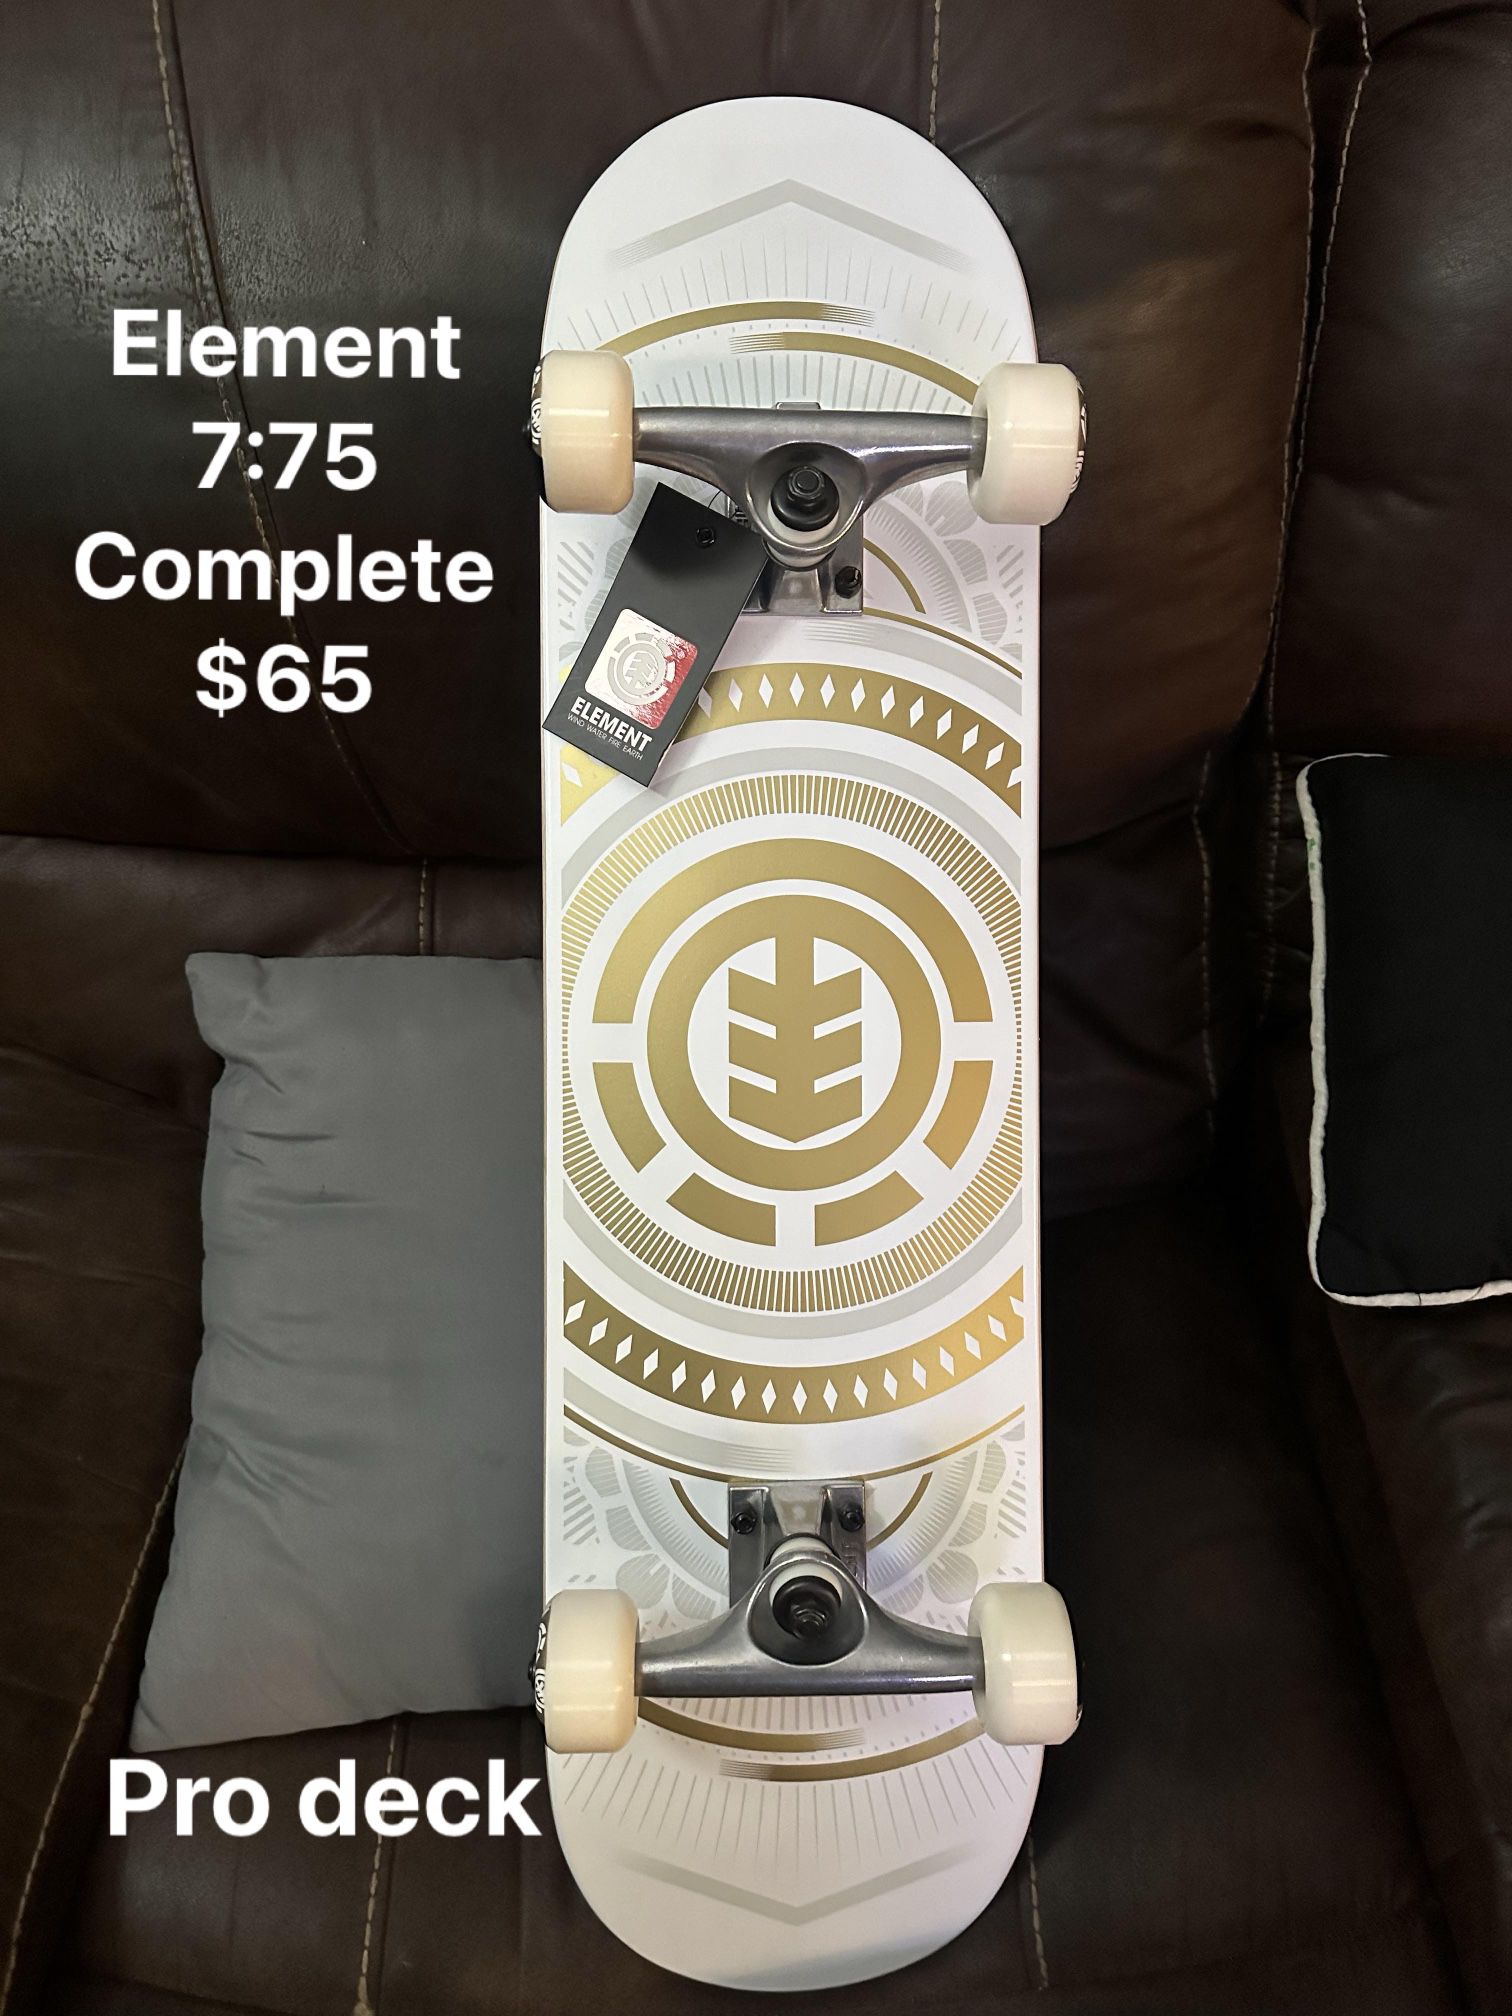 Skateboard Pro Deck 7:75 And 8;0. $65 Complete 